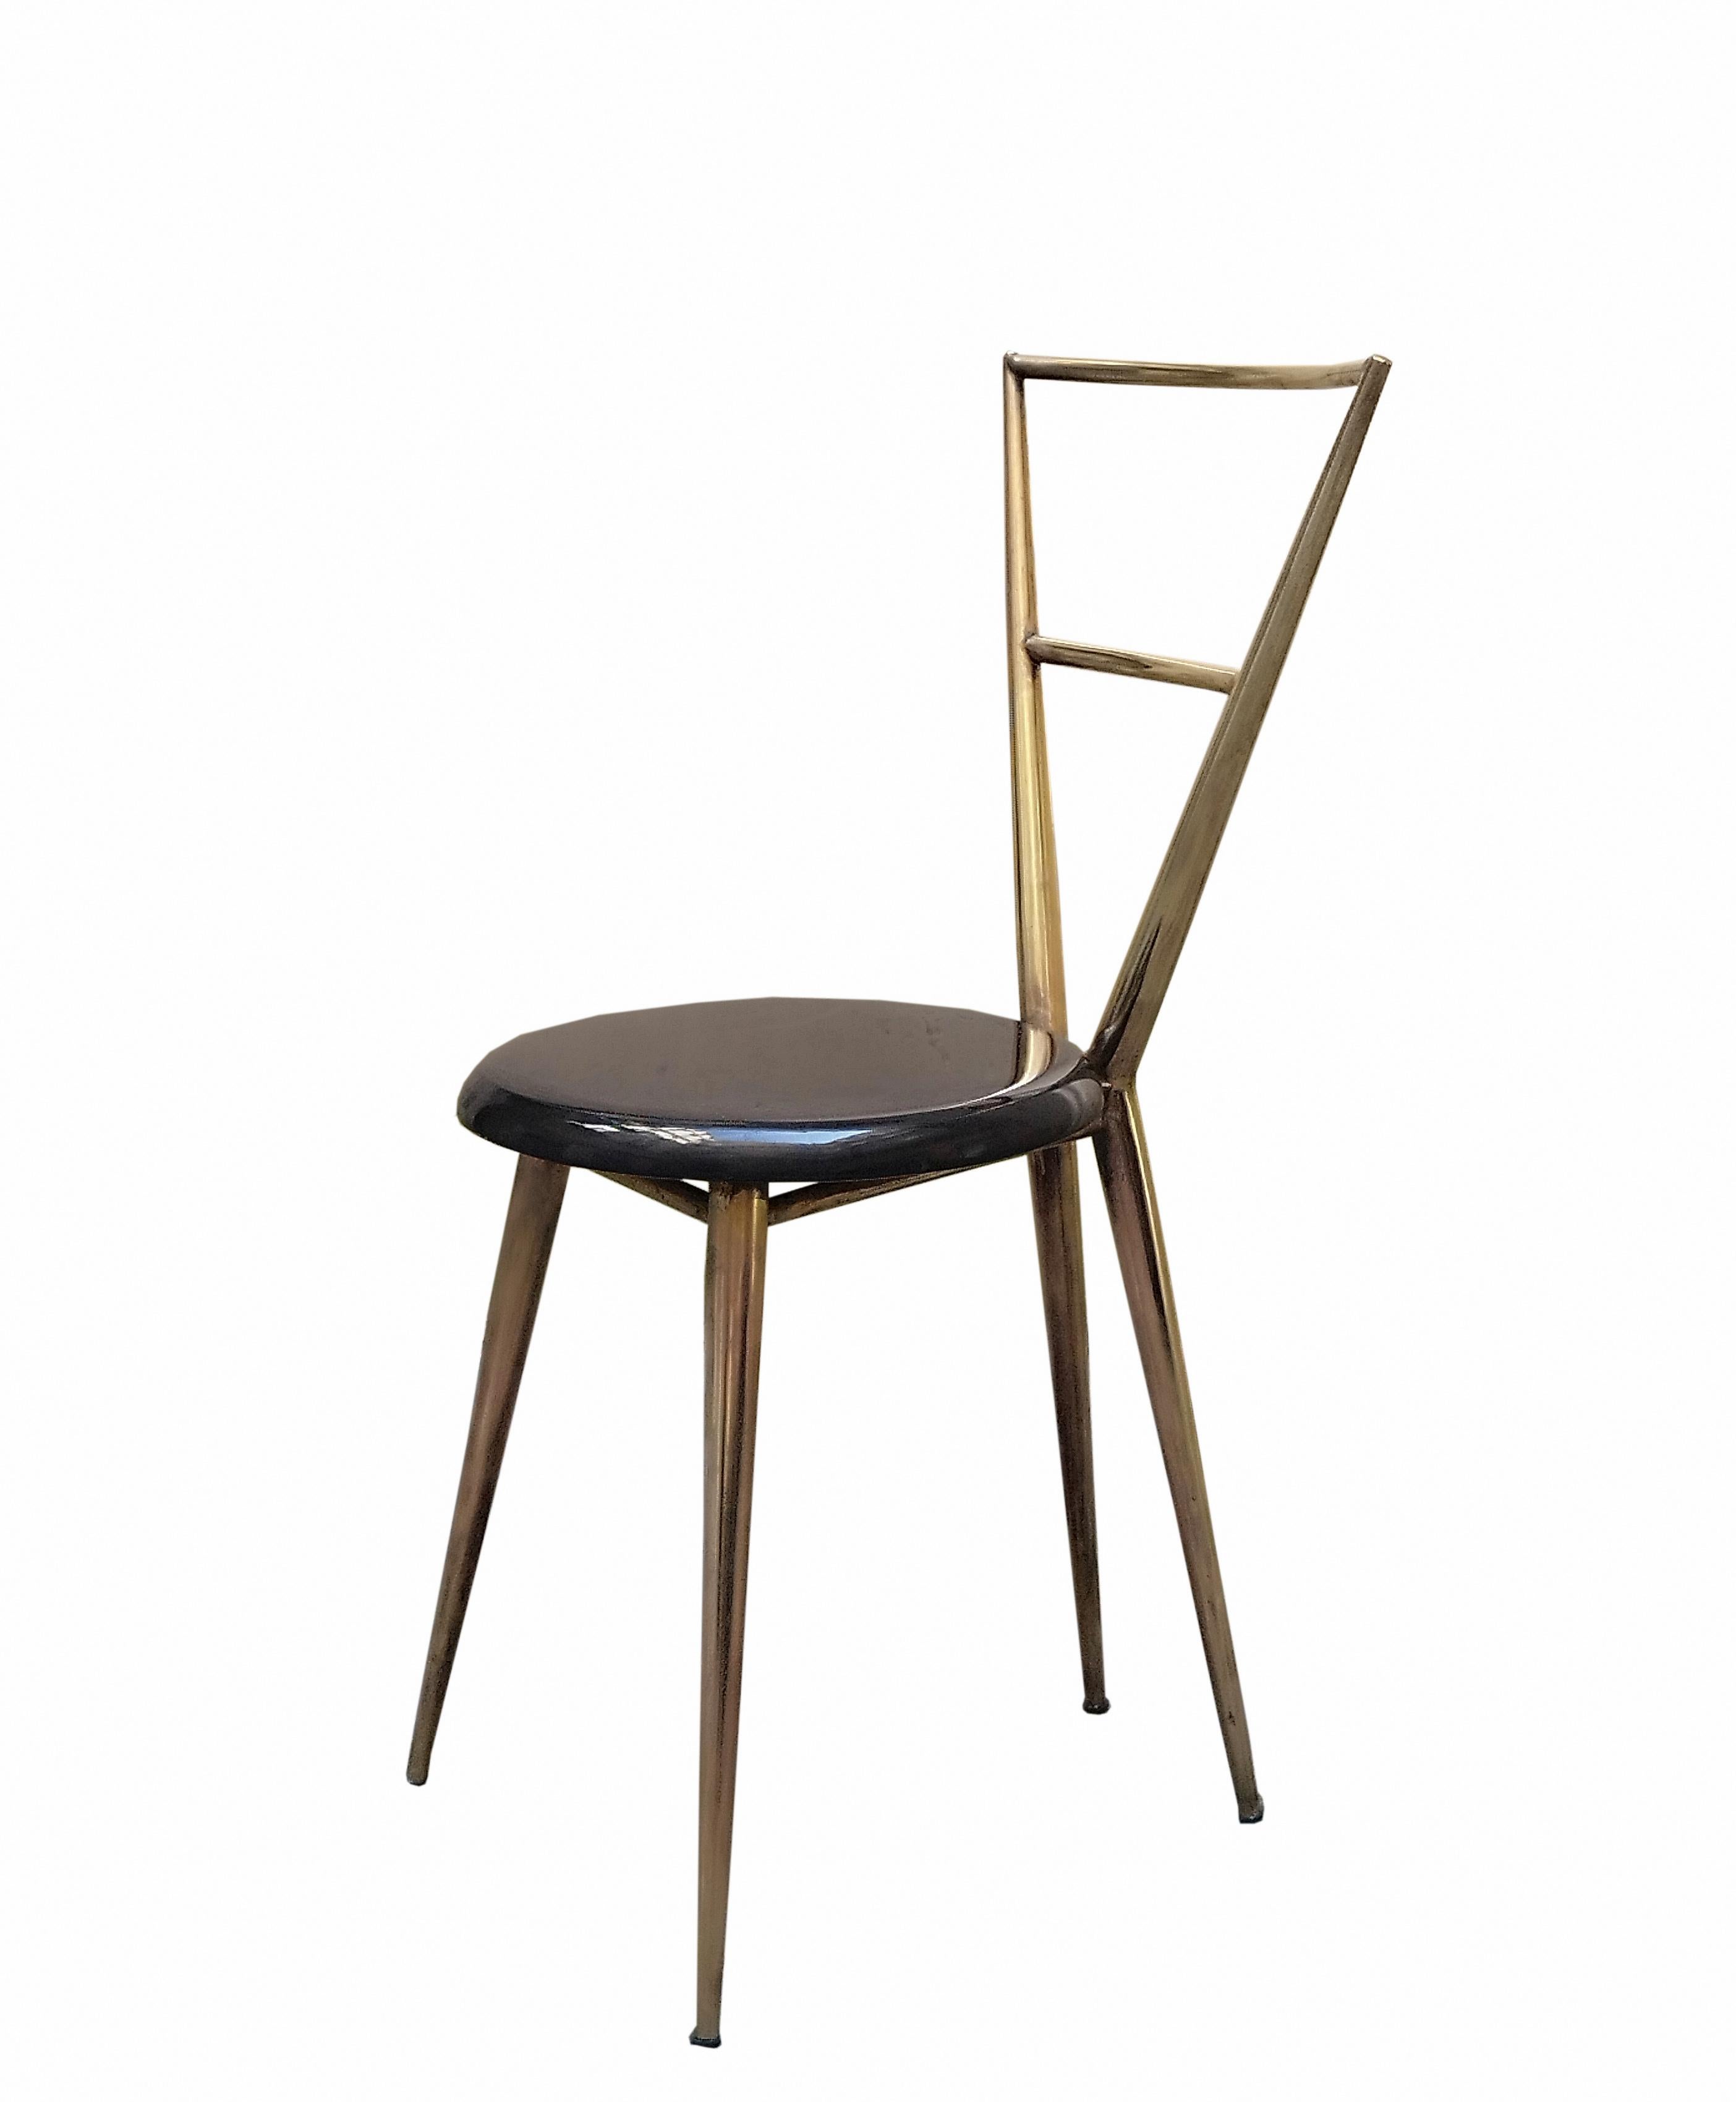 Small and rare 1950s Italian chair in cast brass and round black acrylic seat, in the style of Gio ponti and Minoletti Giulio.